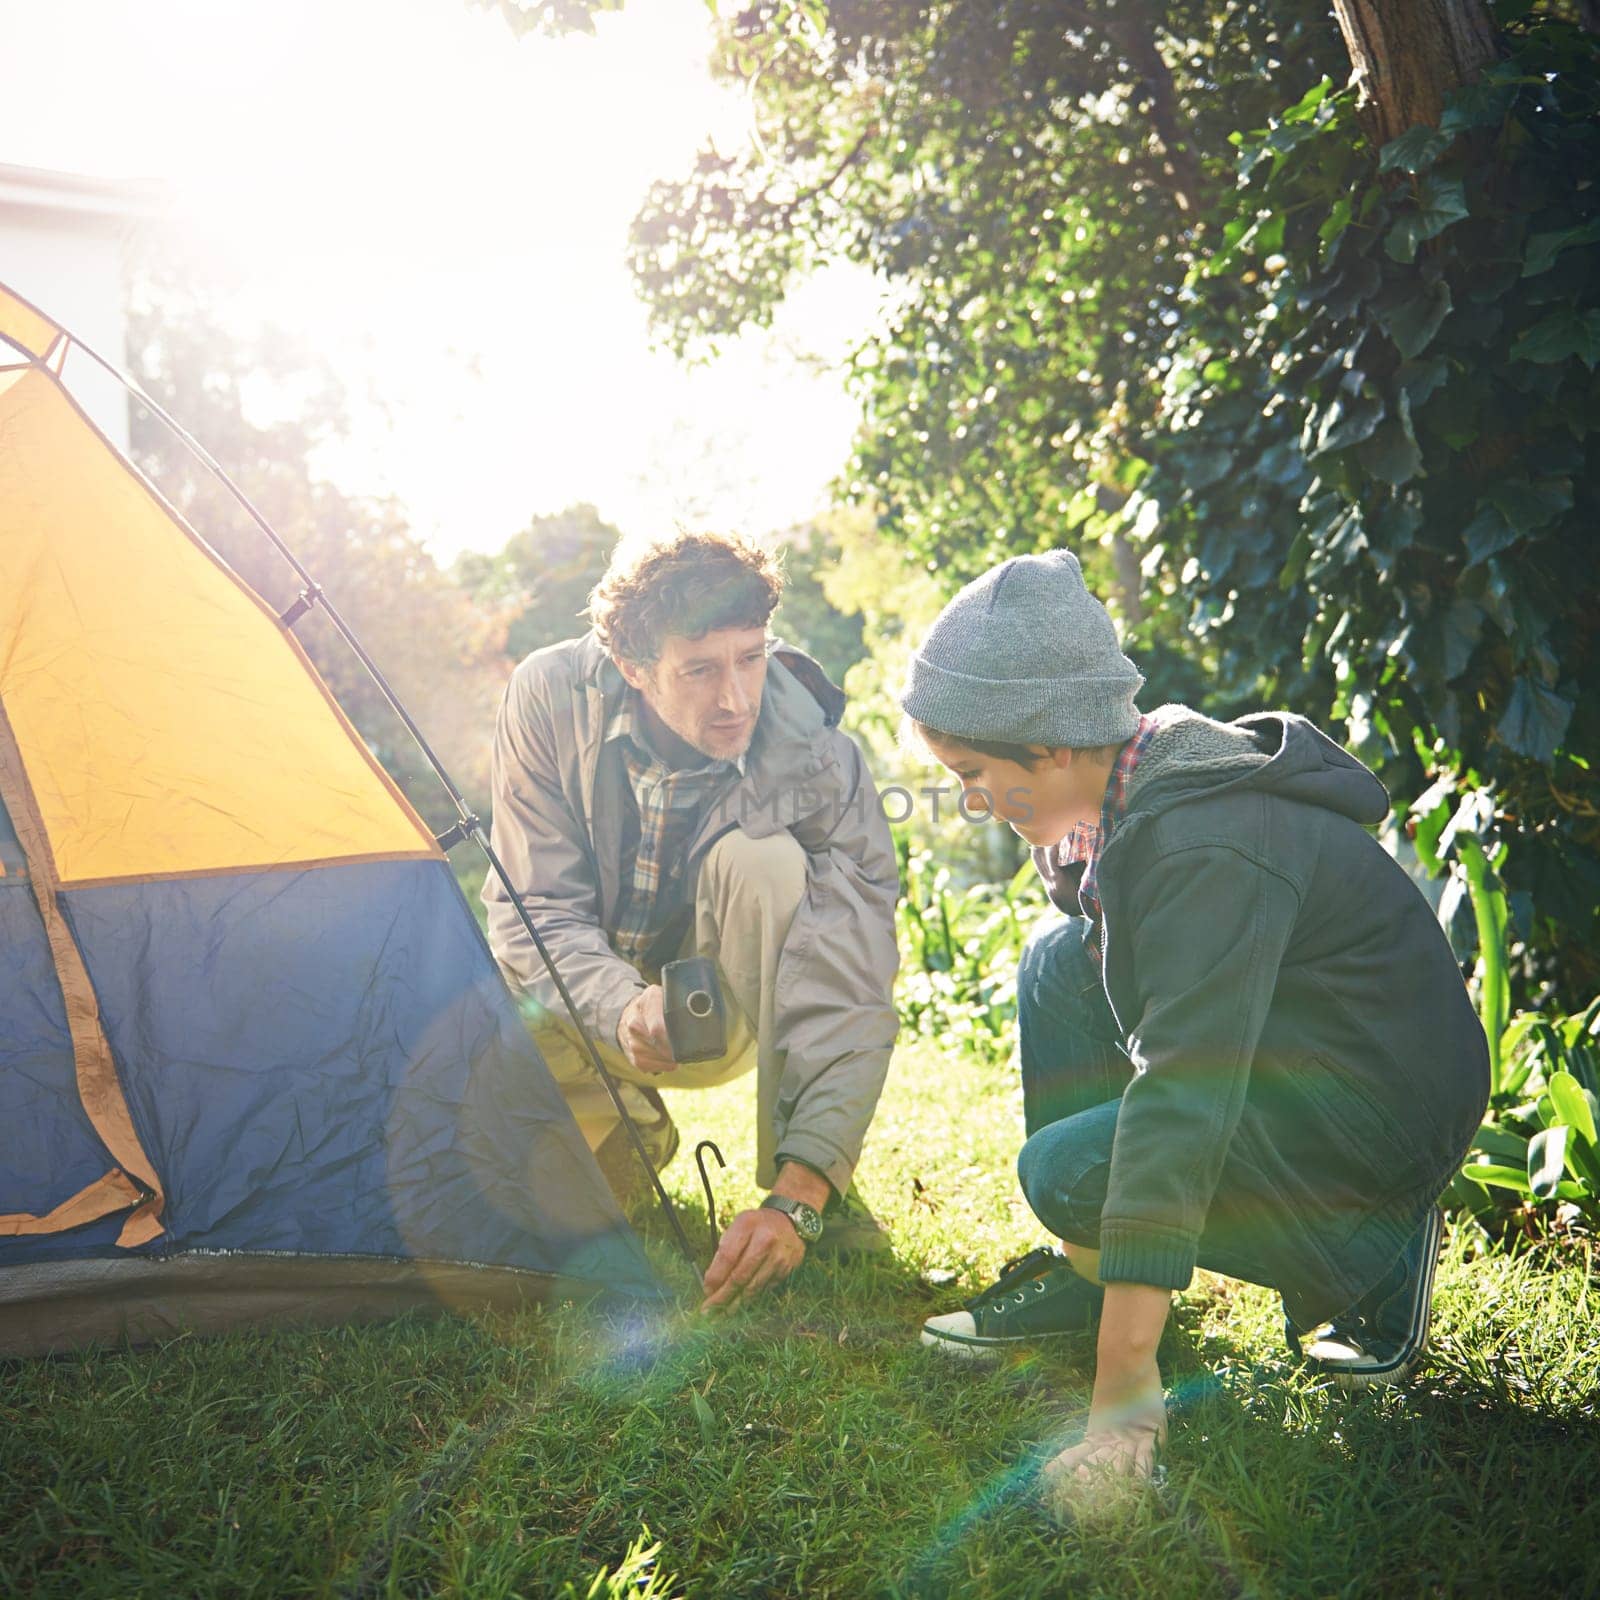 Father, child and hammer tent for camping outdoor in nature on vacation, bonding together and sunset. Dad, boy and preparing camp, learning and helping in forest for travel, holiday and adventure